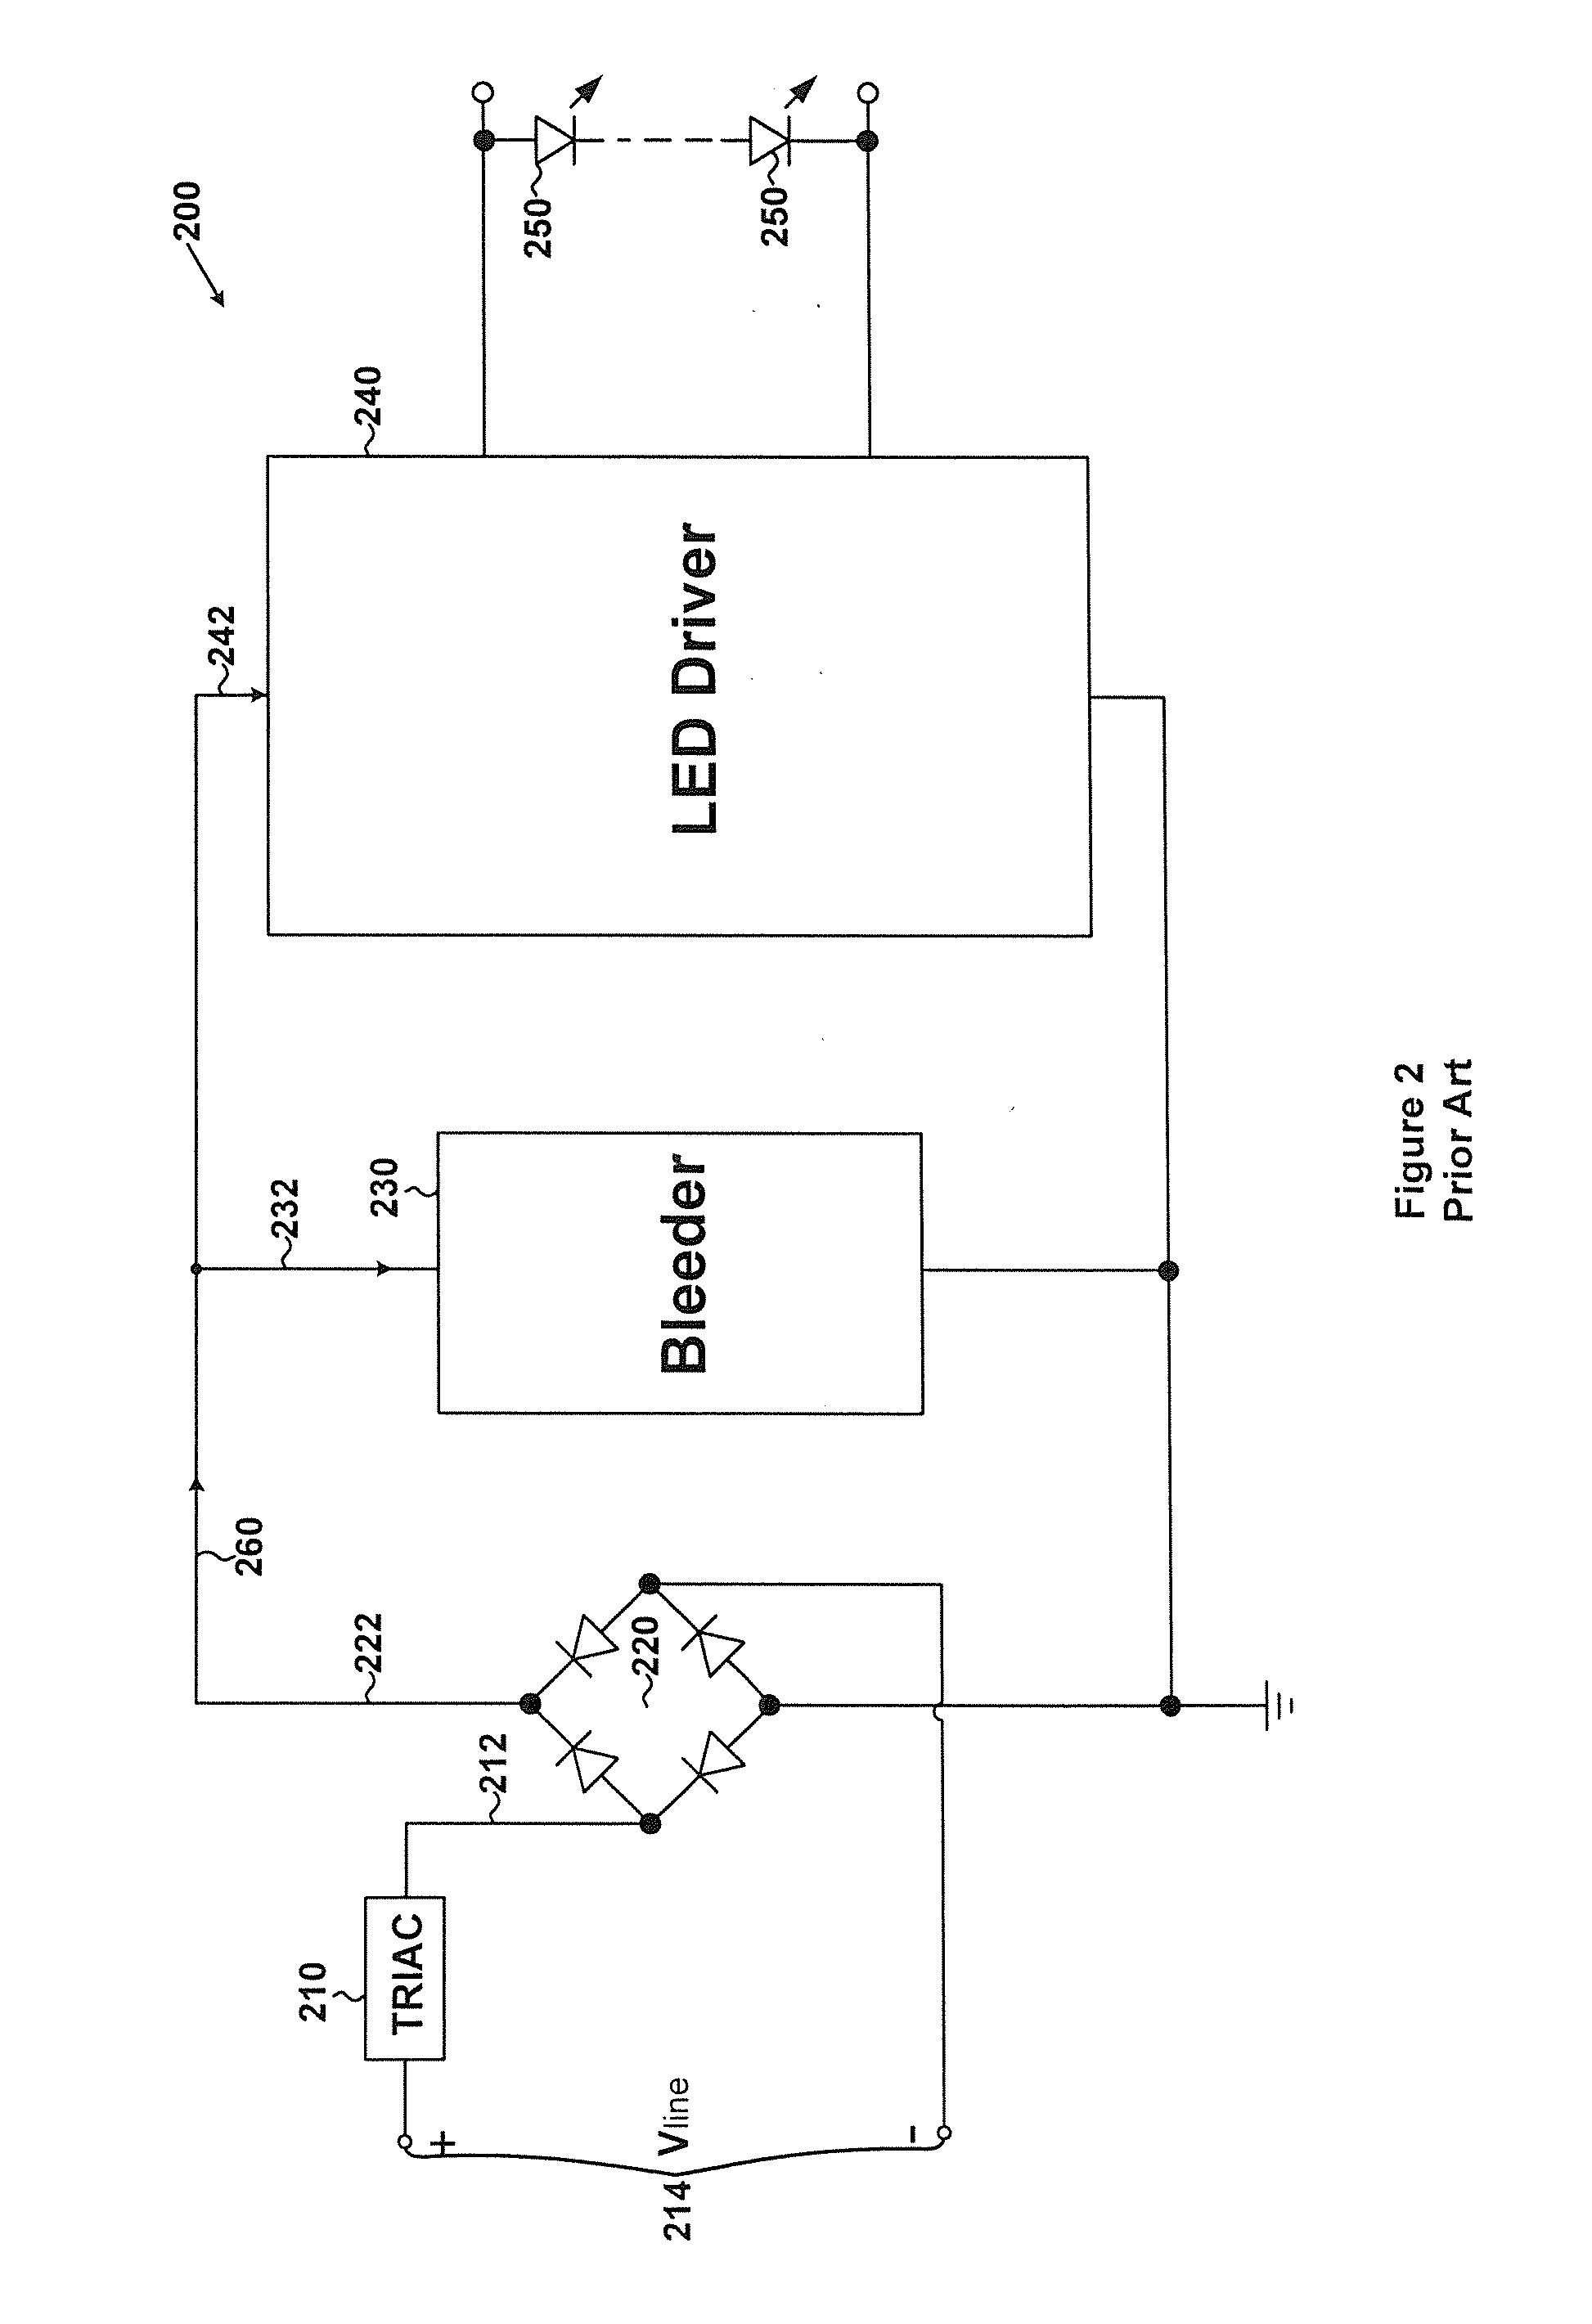 Systems and methods for intelligent control related to triac dimmers